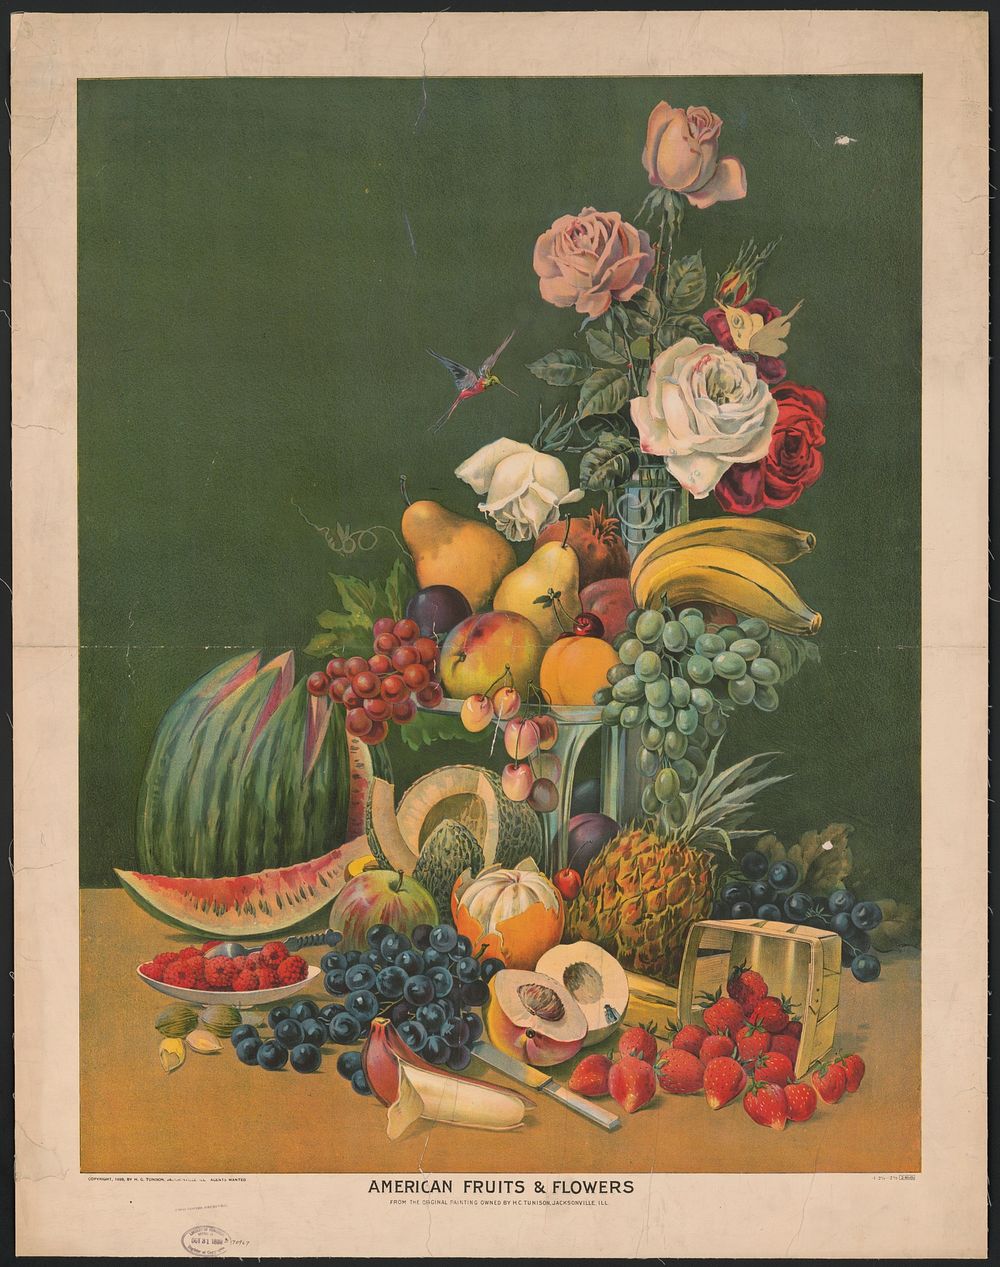 American fruits & flowers (1899). Original from the Library of Congress.